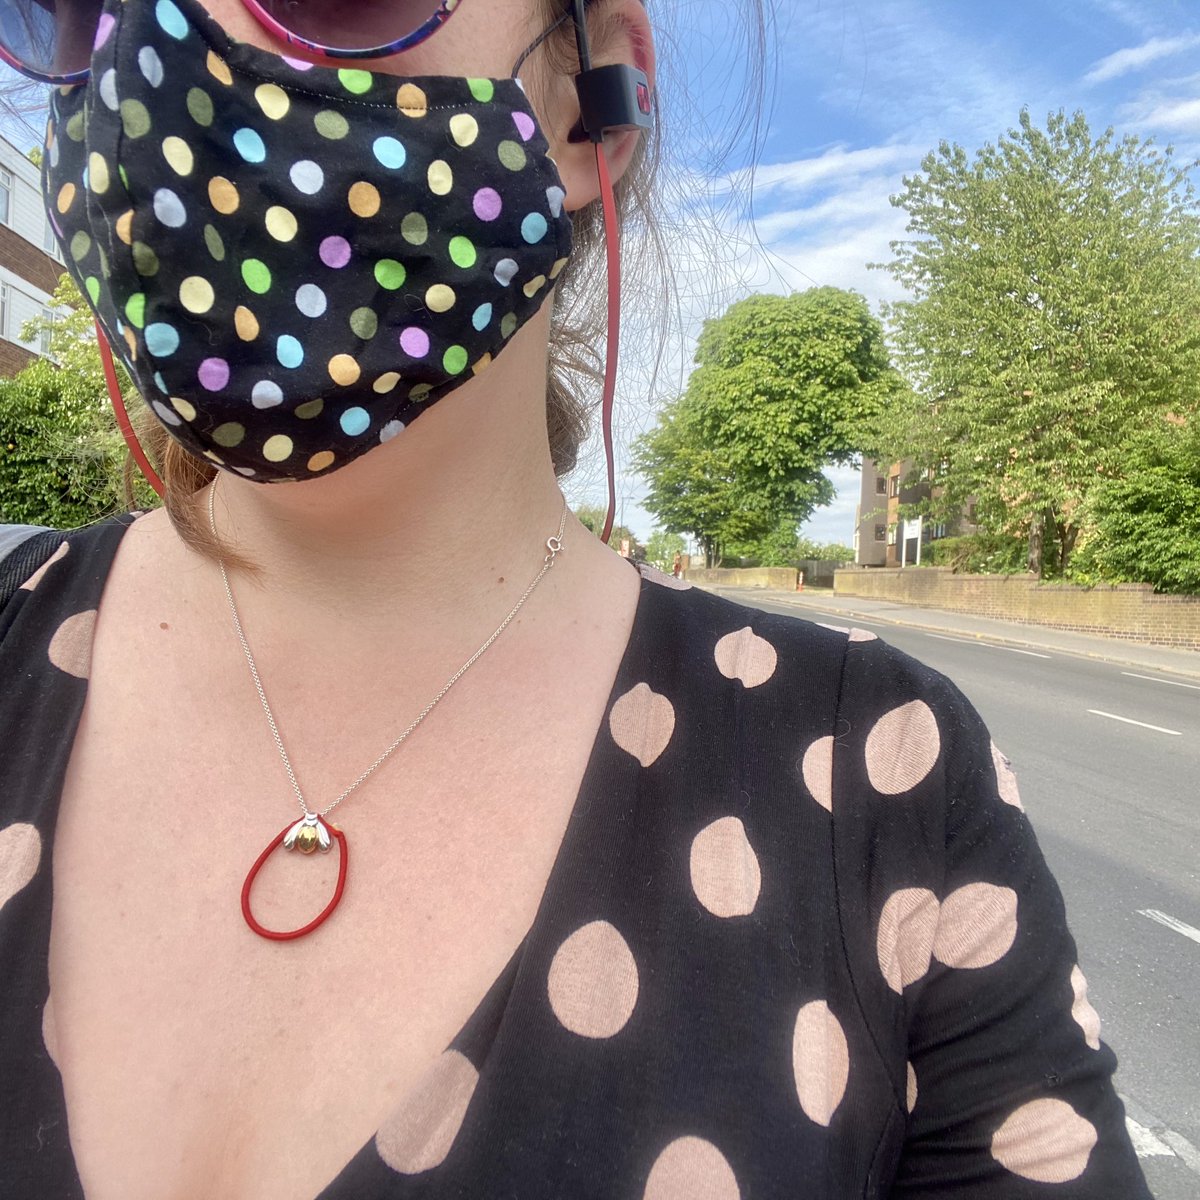 Catching sight of myself in a shop window and realising that I am accidentally wearing a spotty mask and dress. Could have been an intentional style choice; actually a coincidence!